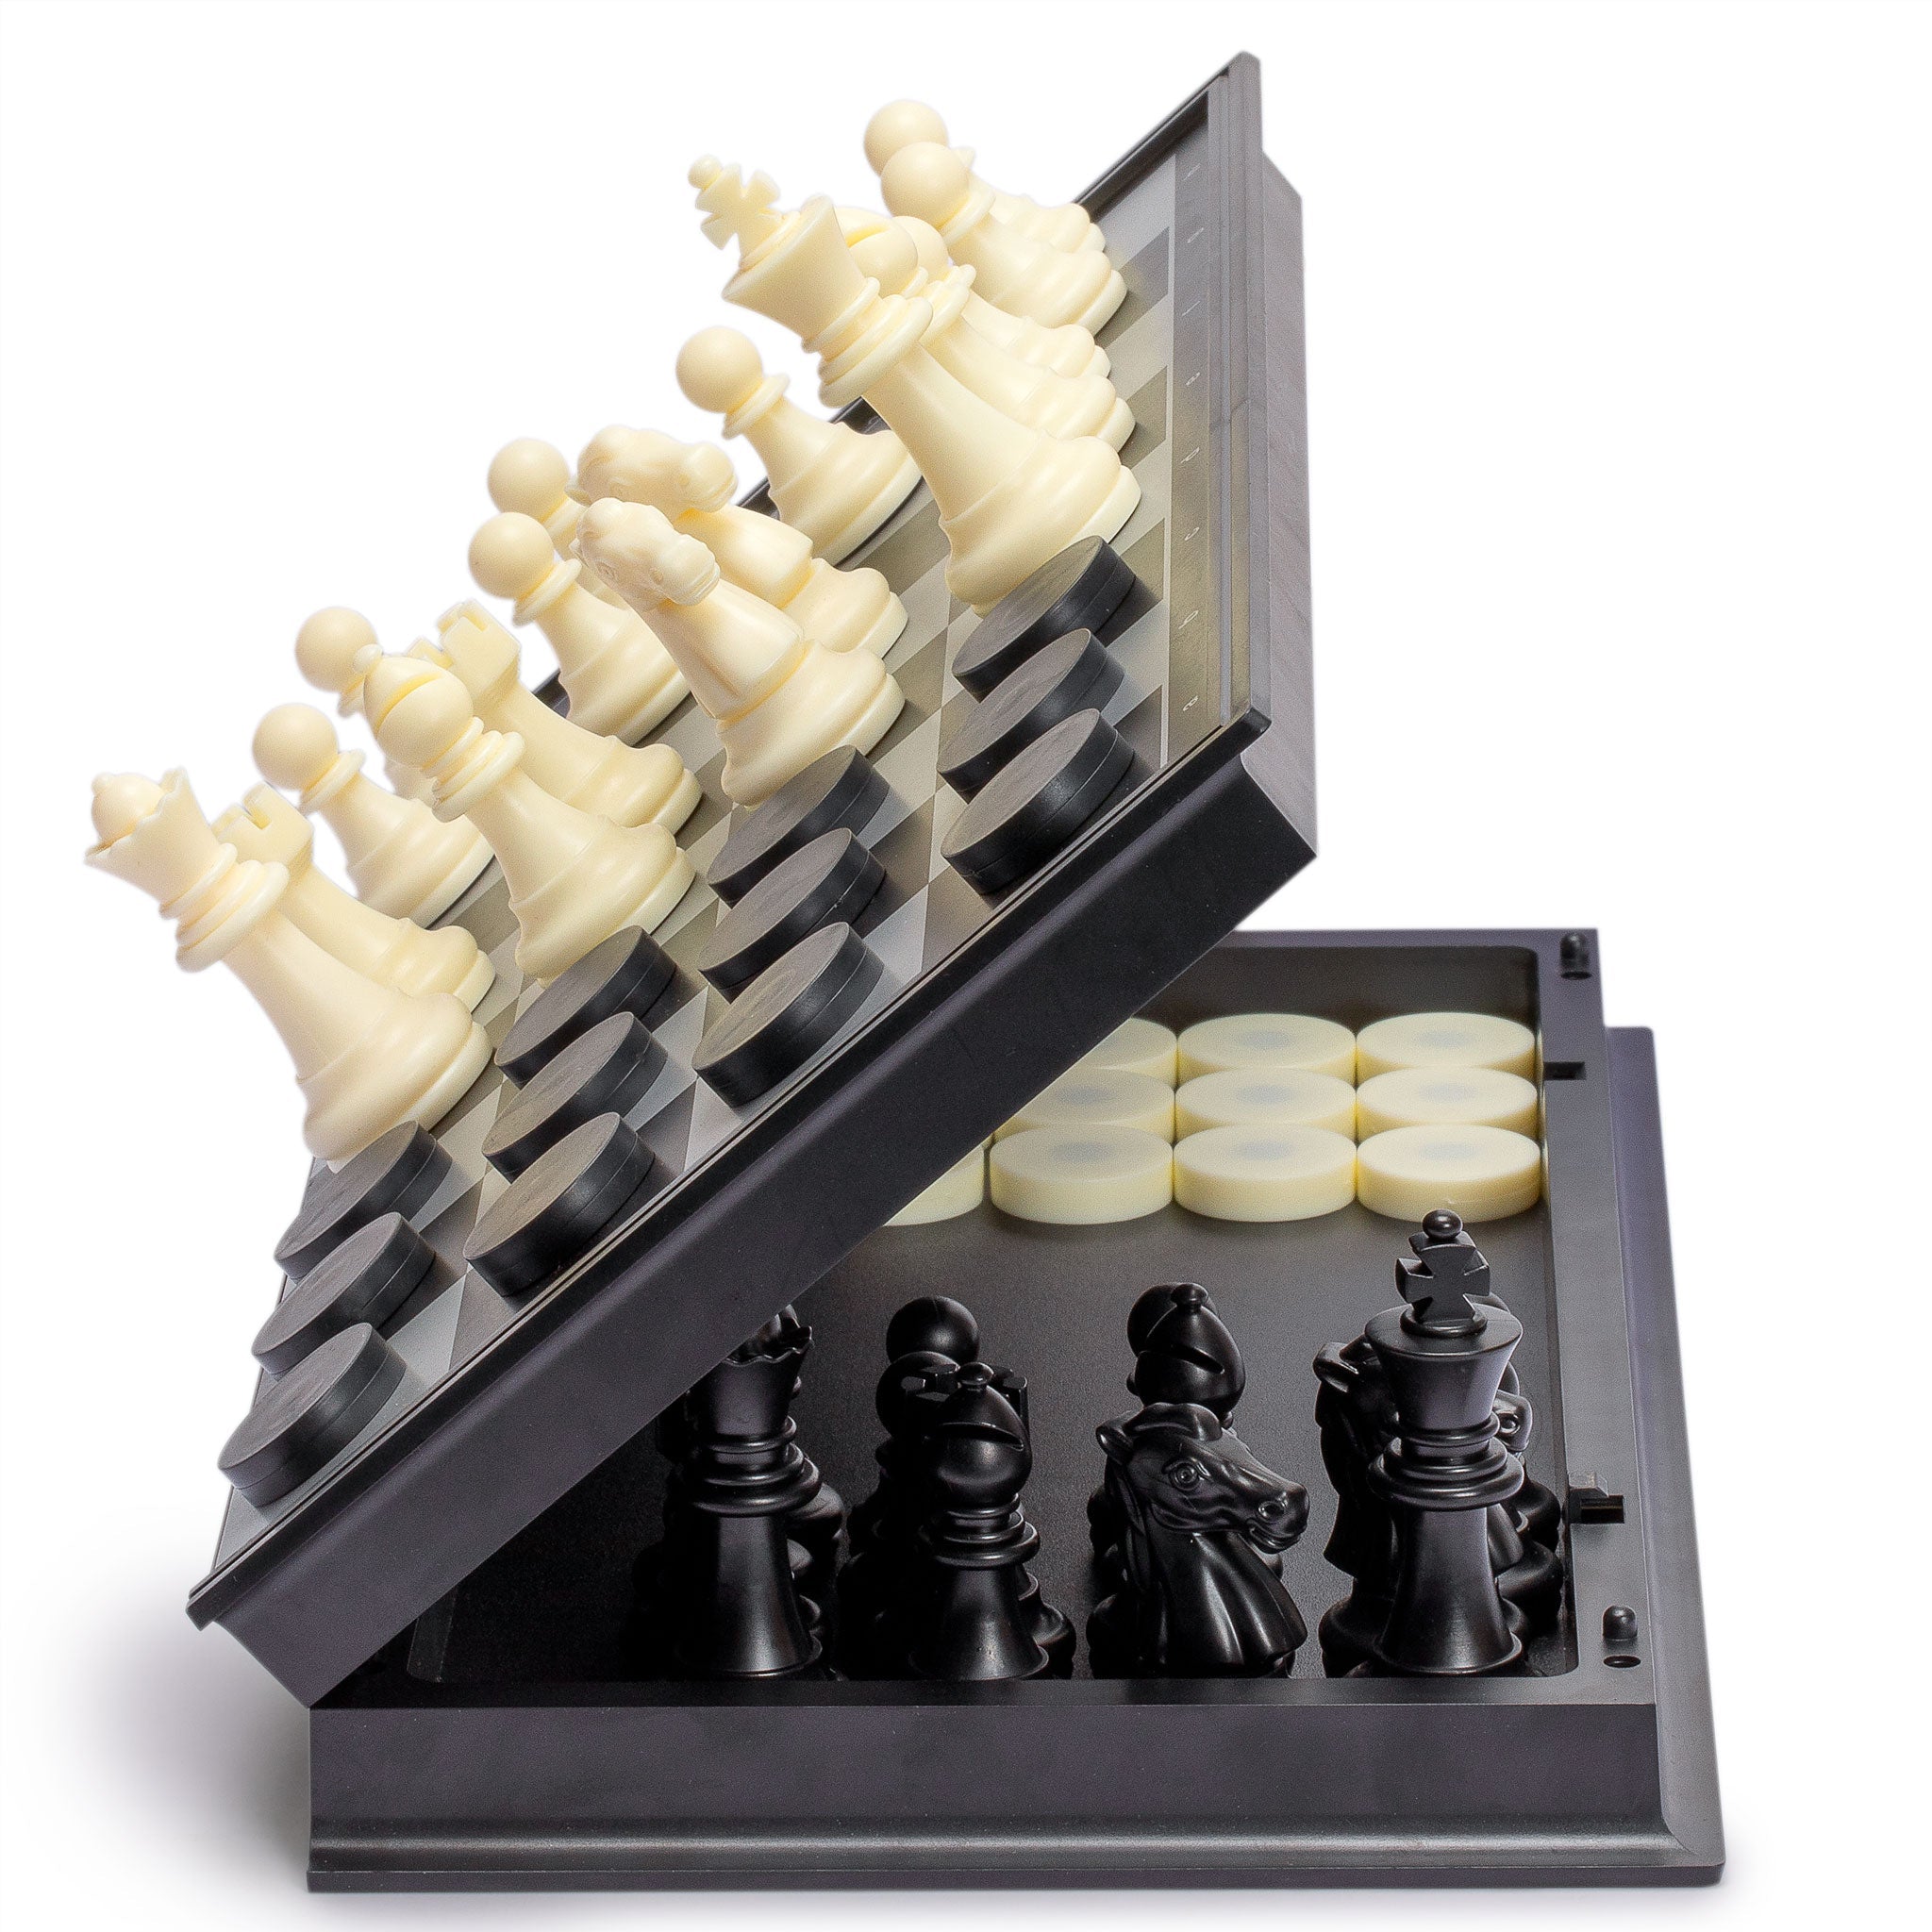 Which Came First: Checkers or Chess?